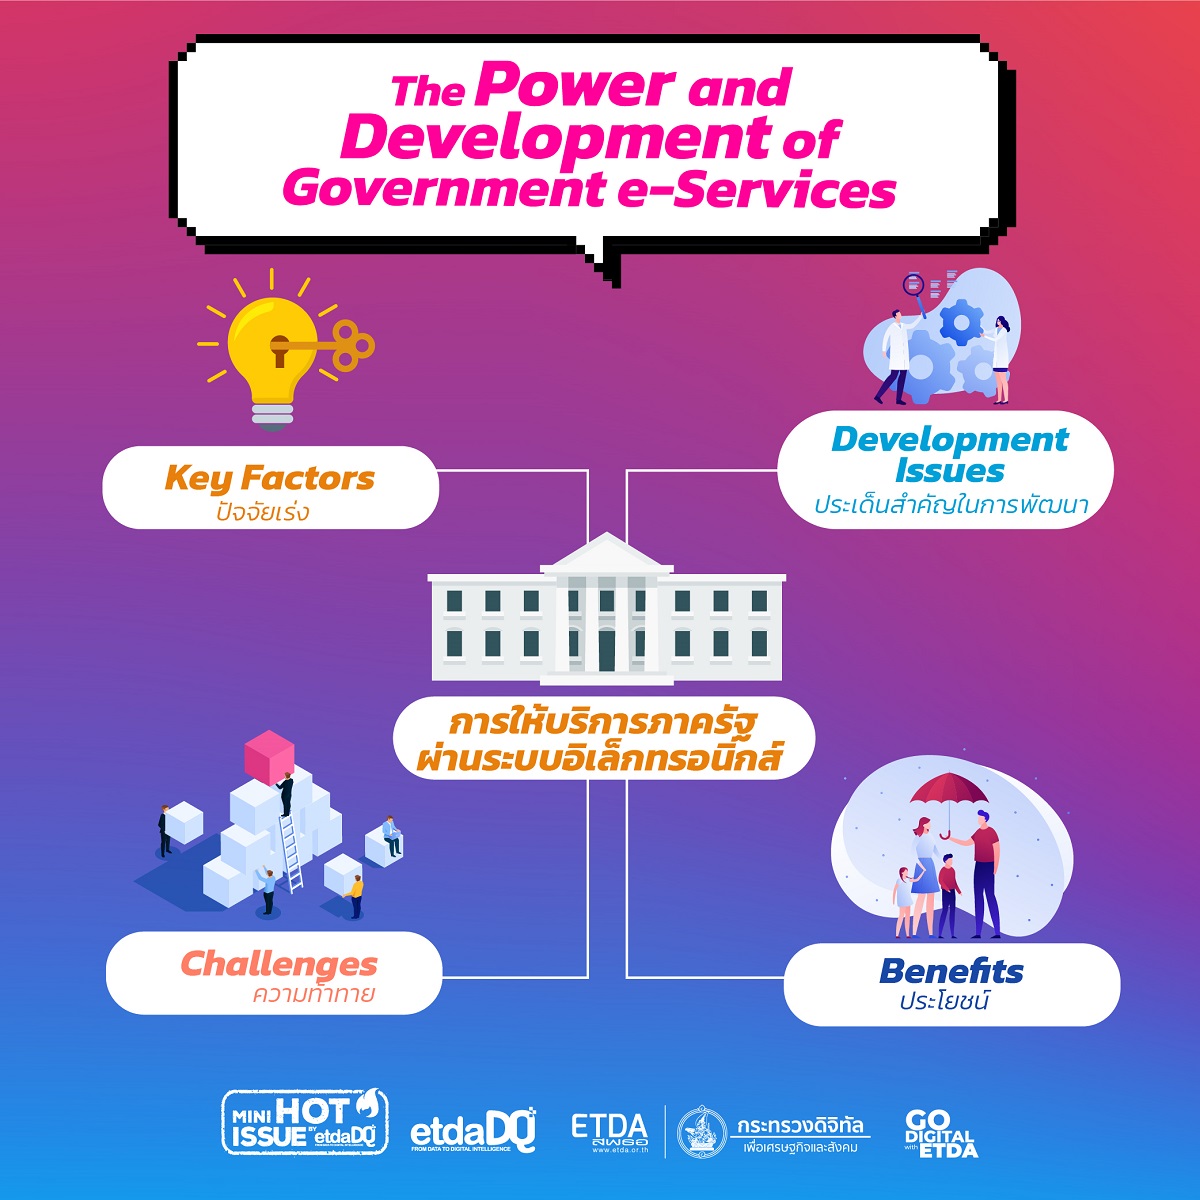 The-Power-and-Development-of-Government-e-Services-01_web.jpg